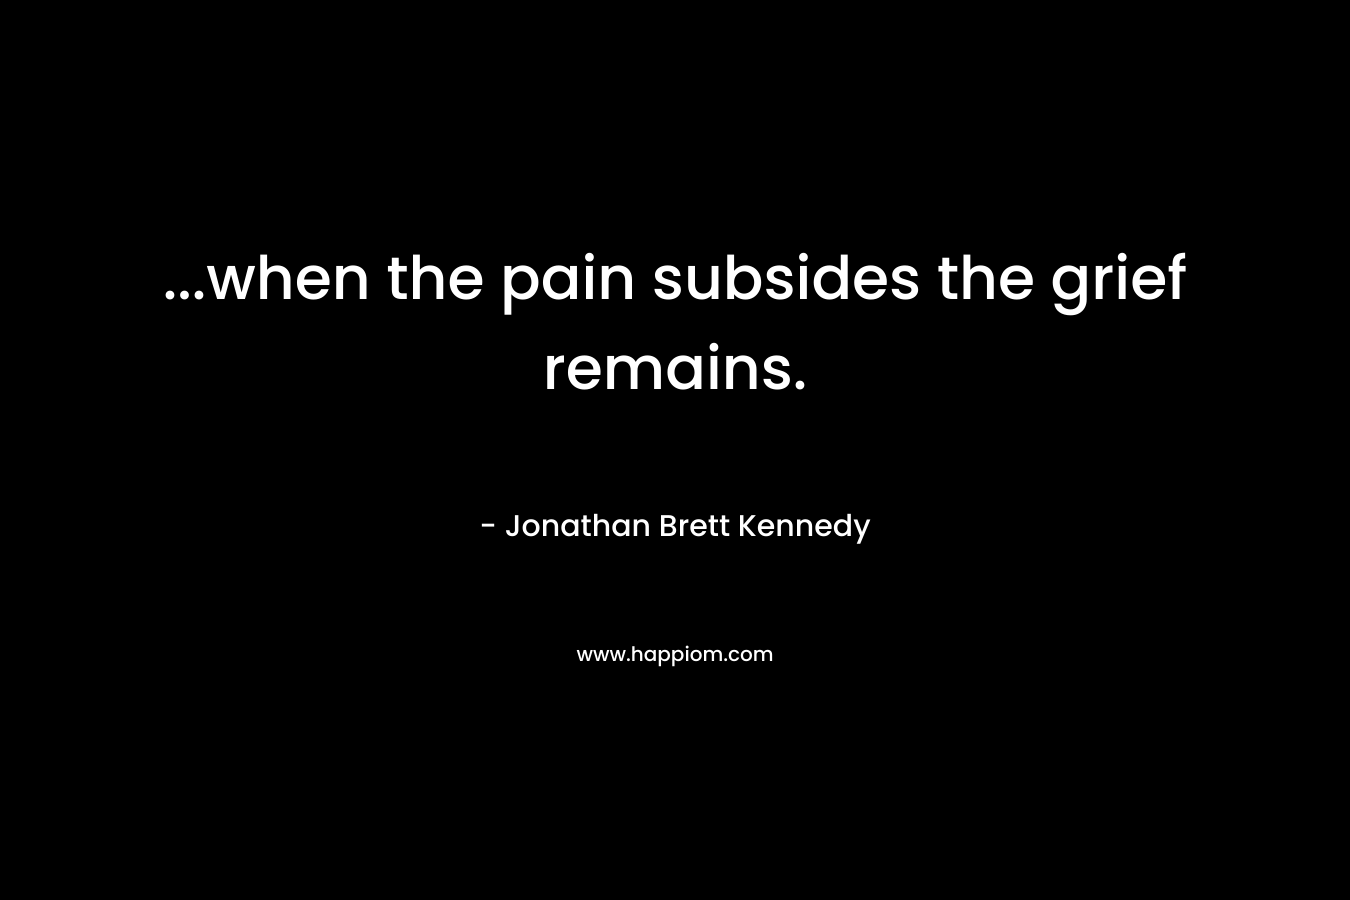 ...when the pain subsides the grief remains.